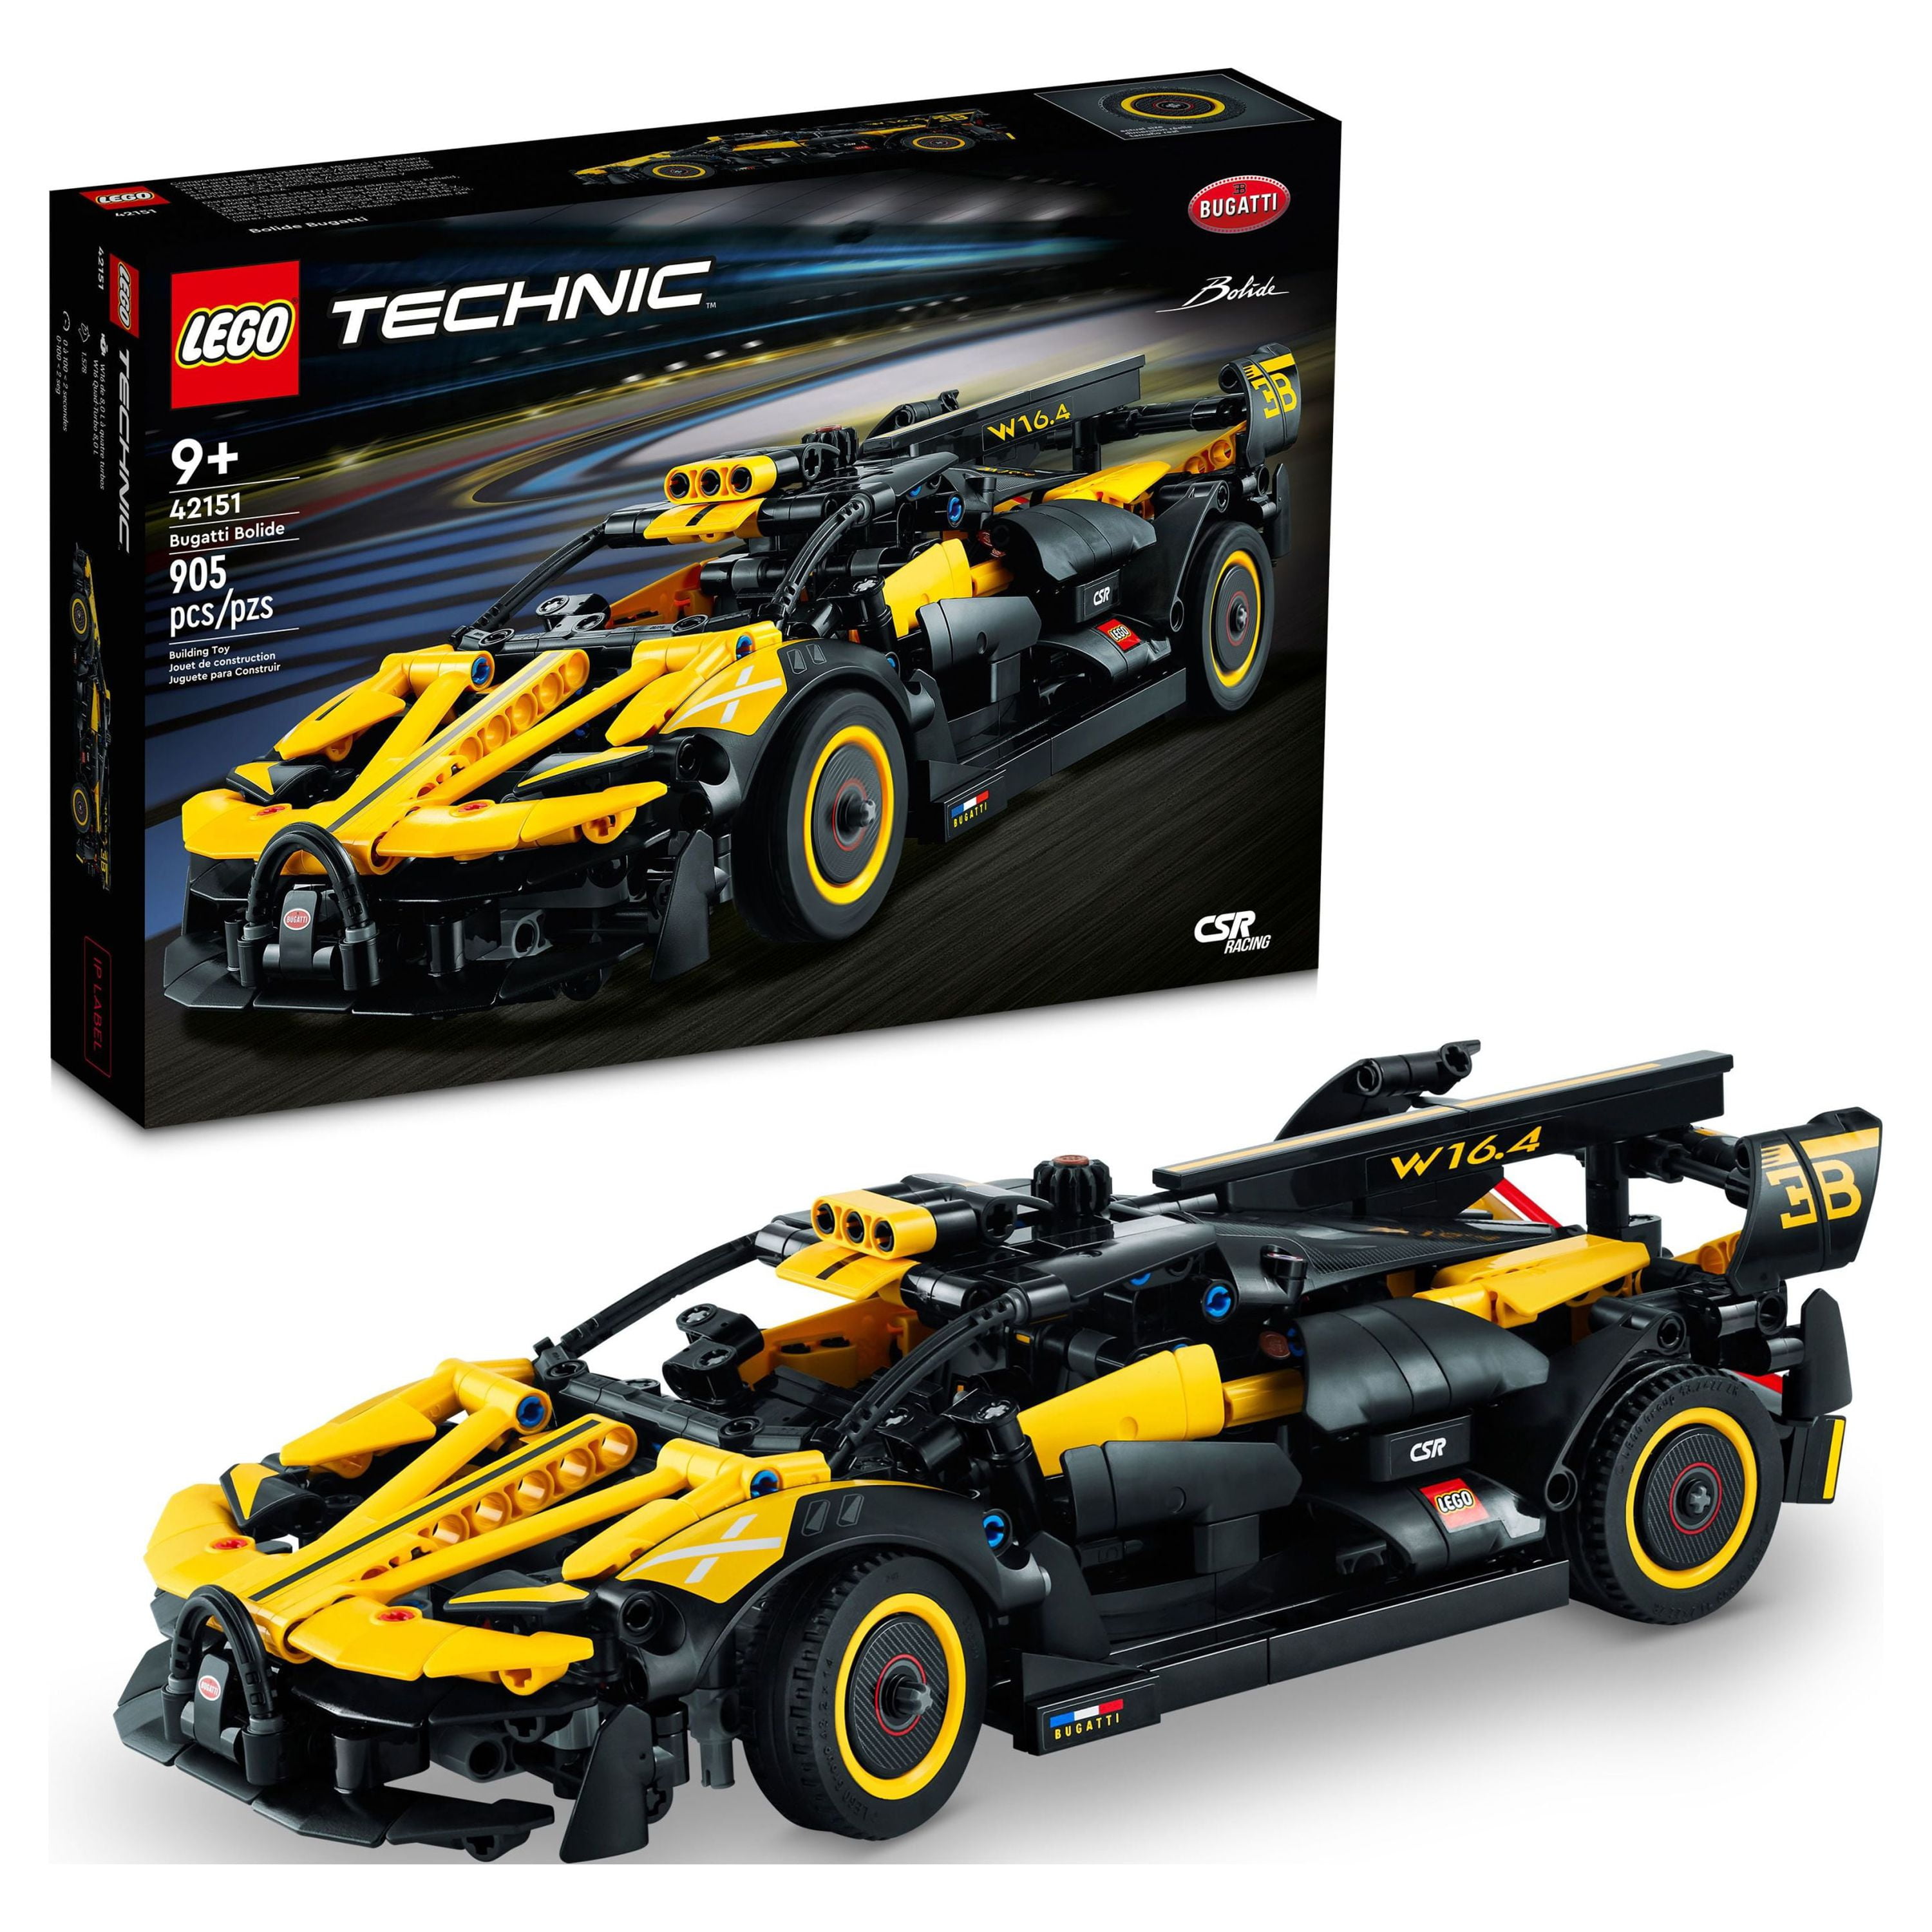 Lego®technic 42138 - ford mustang shelby® gt500®, jeux de constructions &  maquettes